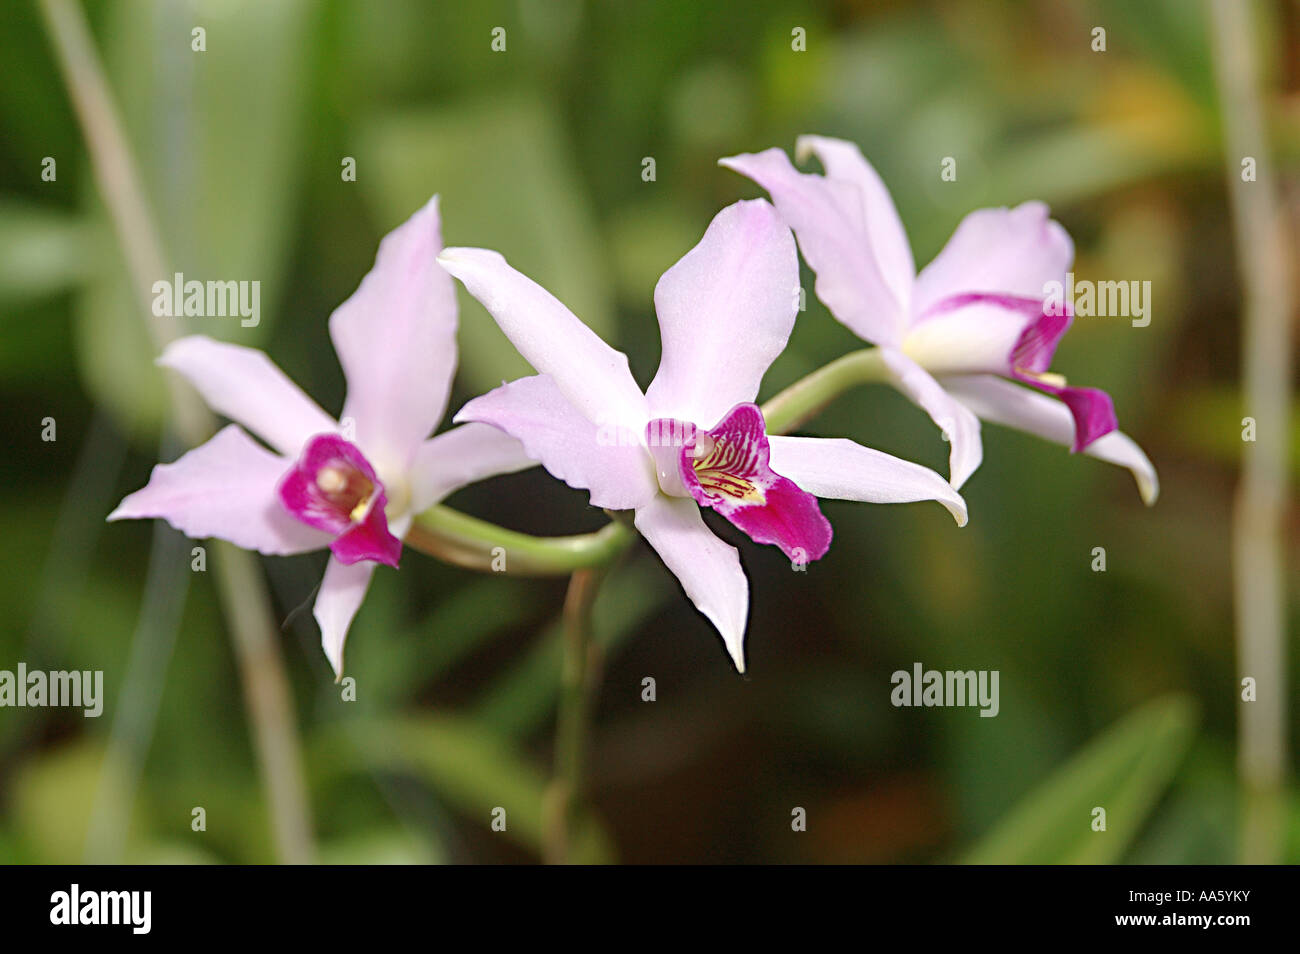 Flower Laelia anceps Orchid Stock Photo